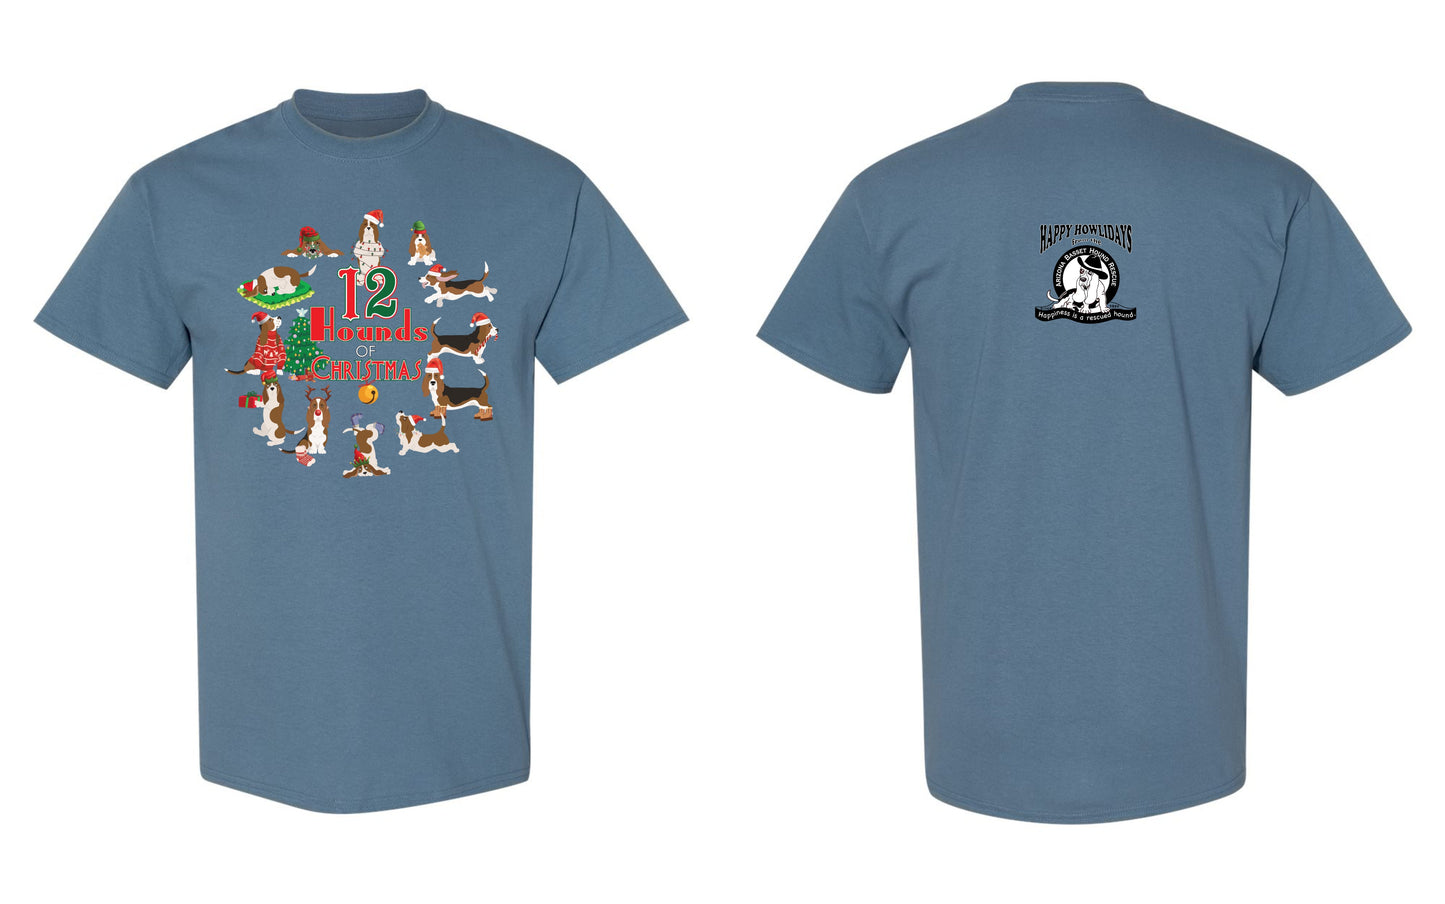 12 Hounds of Christmas Children's Shirt *10 colors*